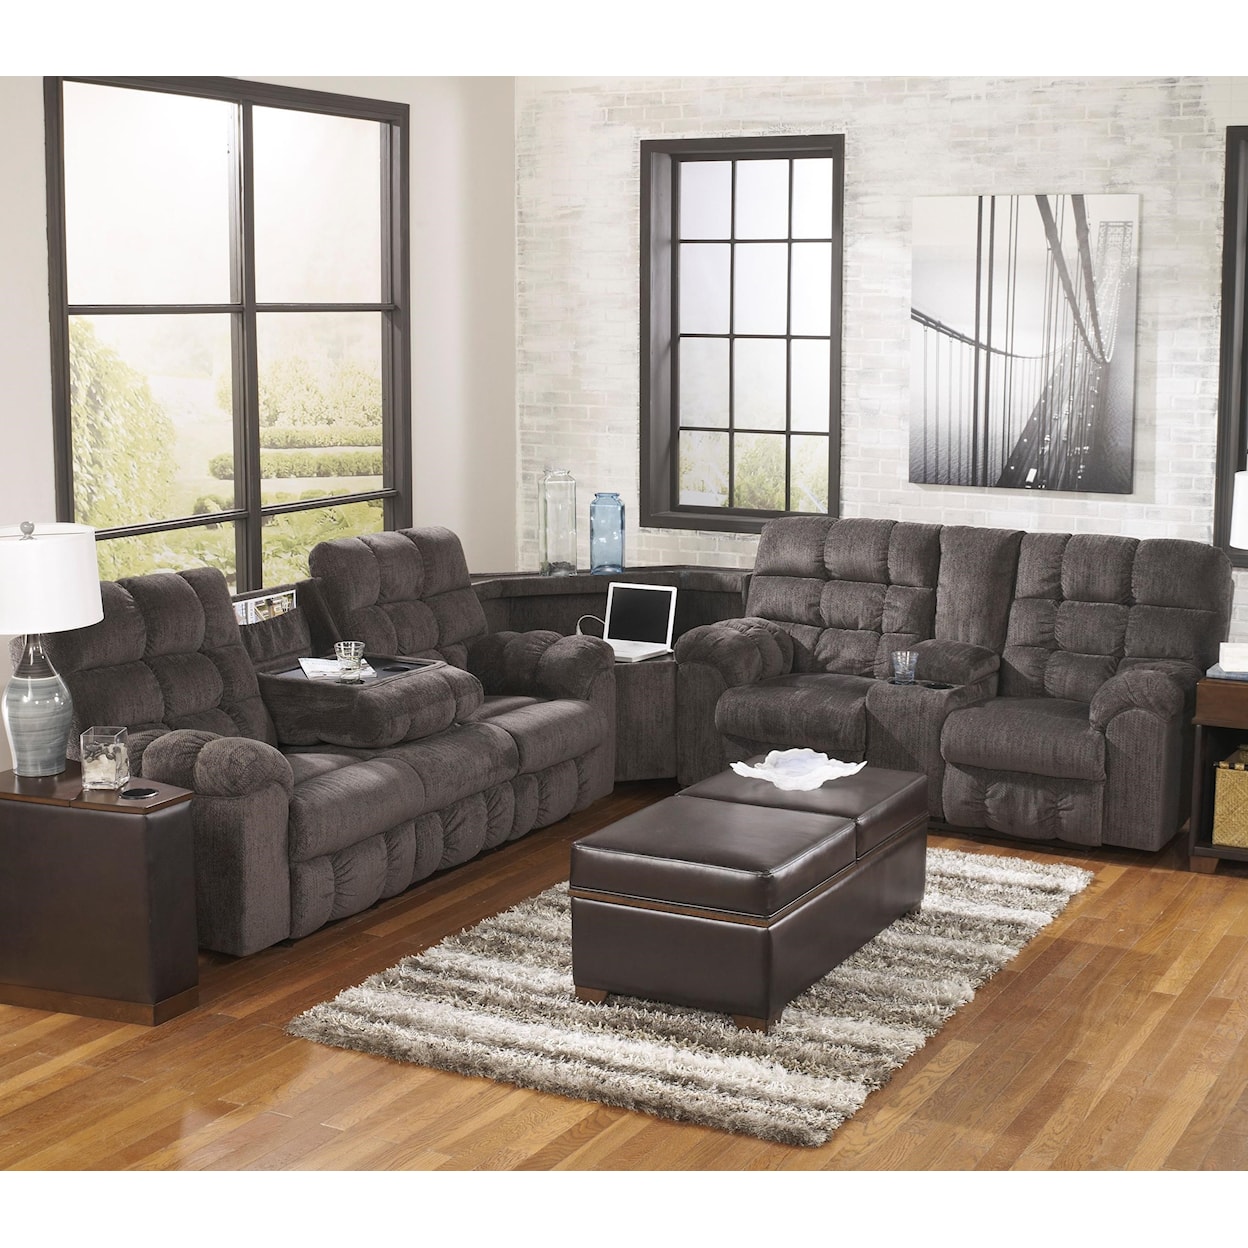 Michael Alan Select Acieona Reclining Sectional with Right Side Loveseat